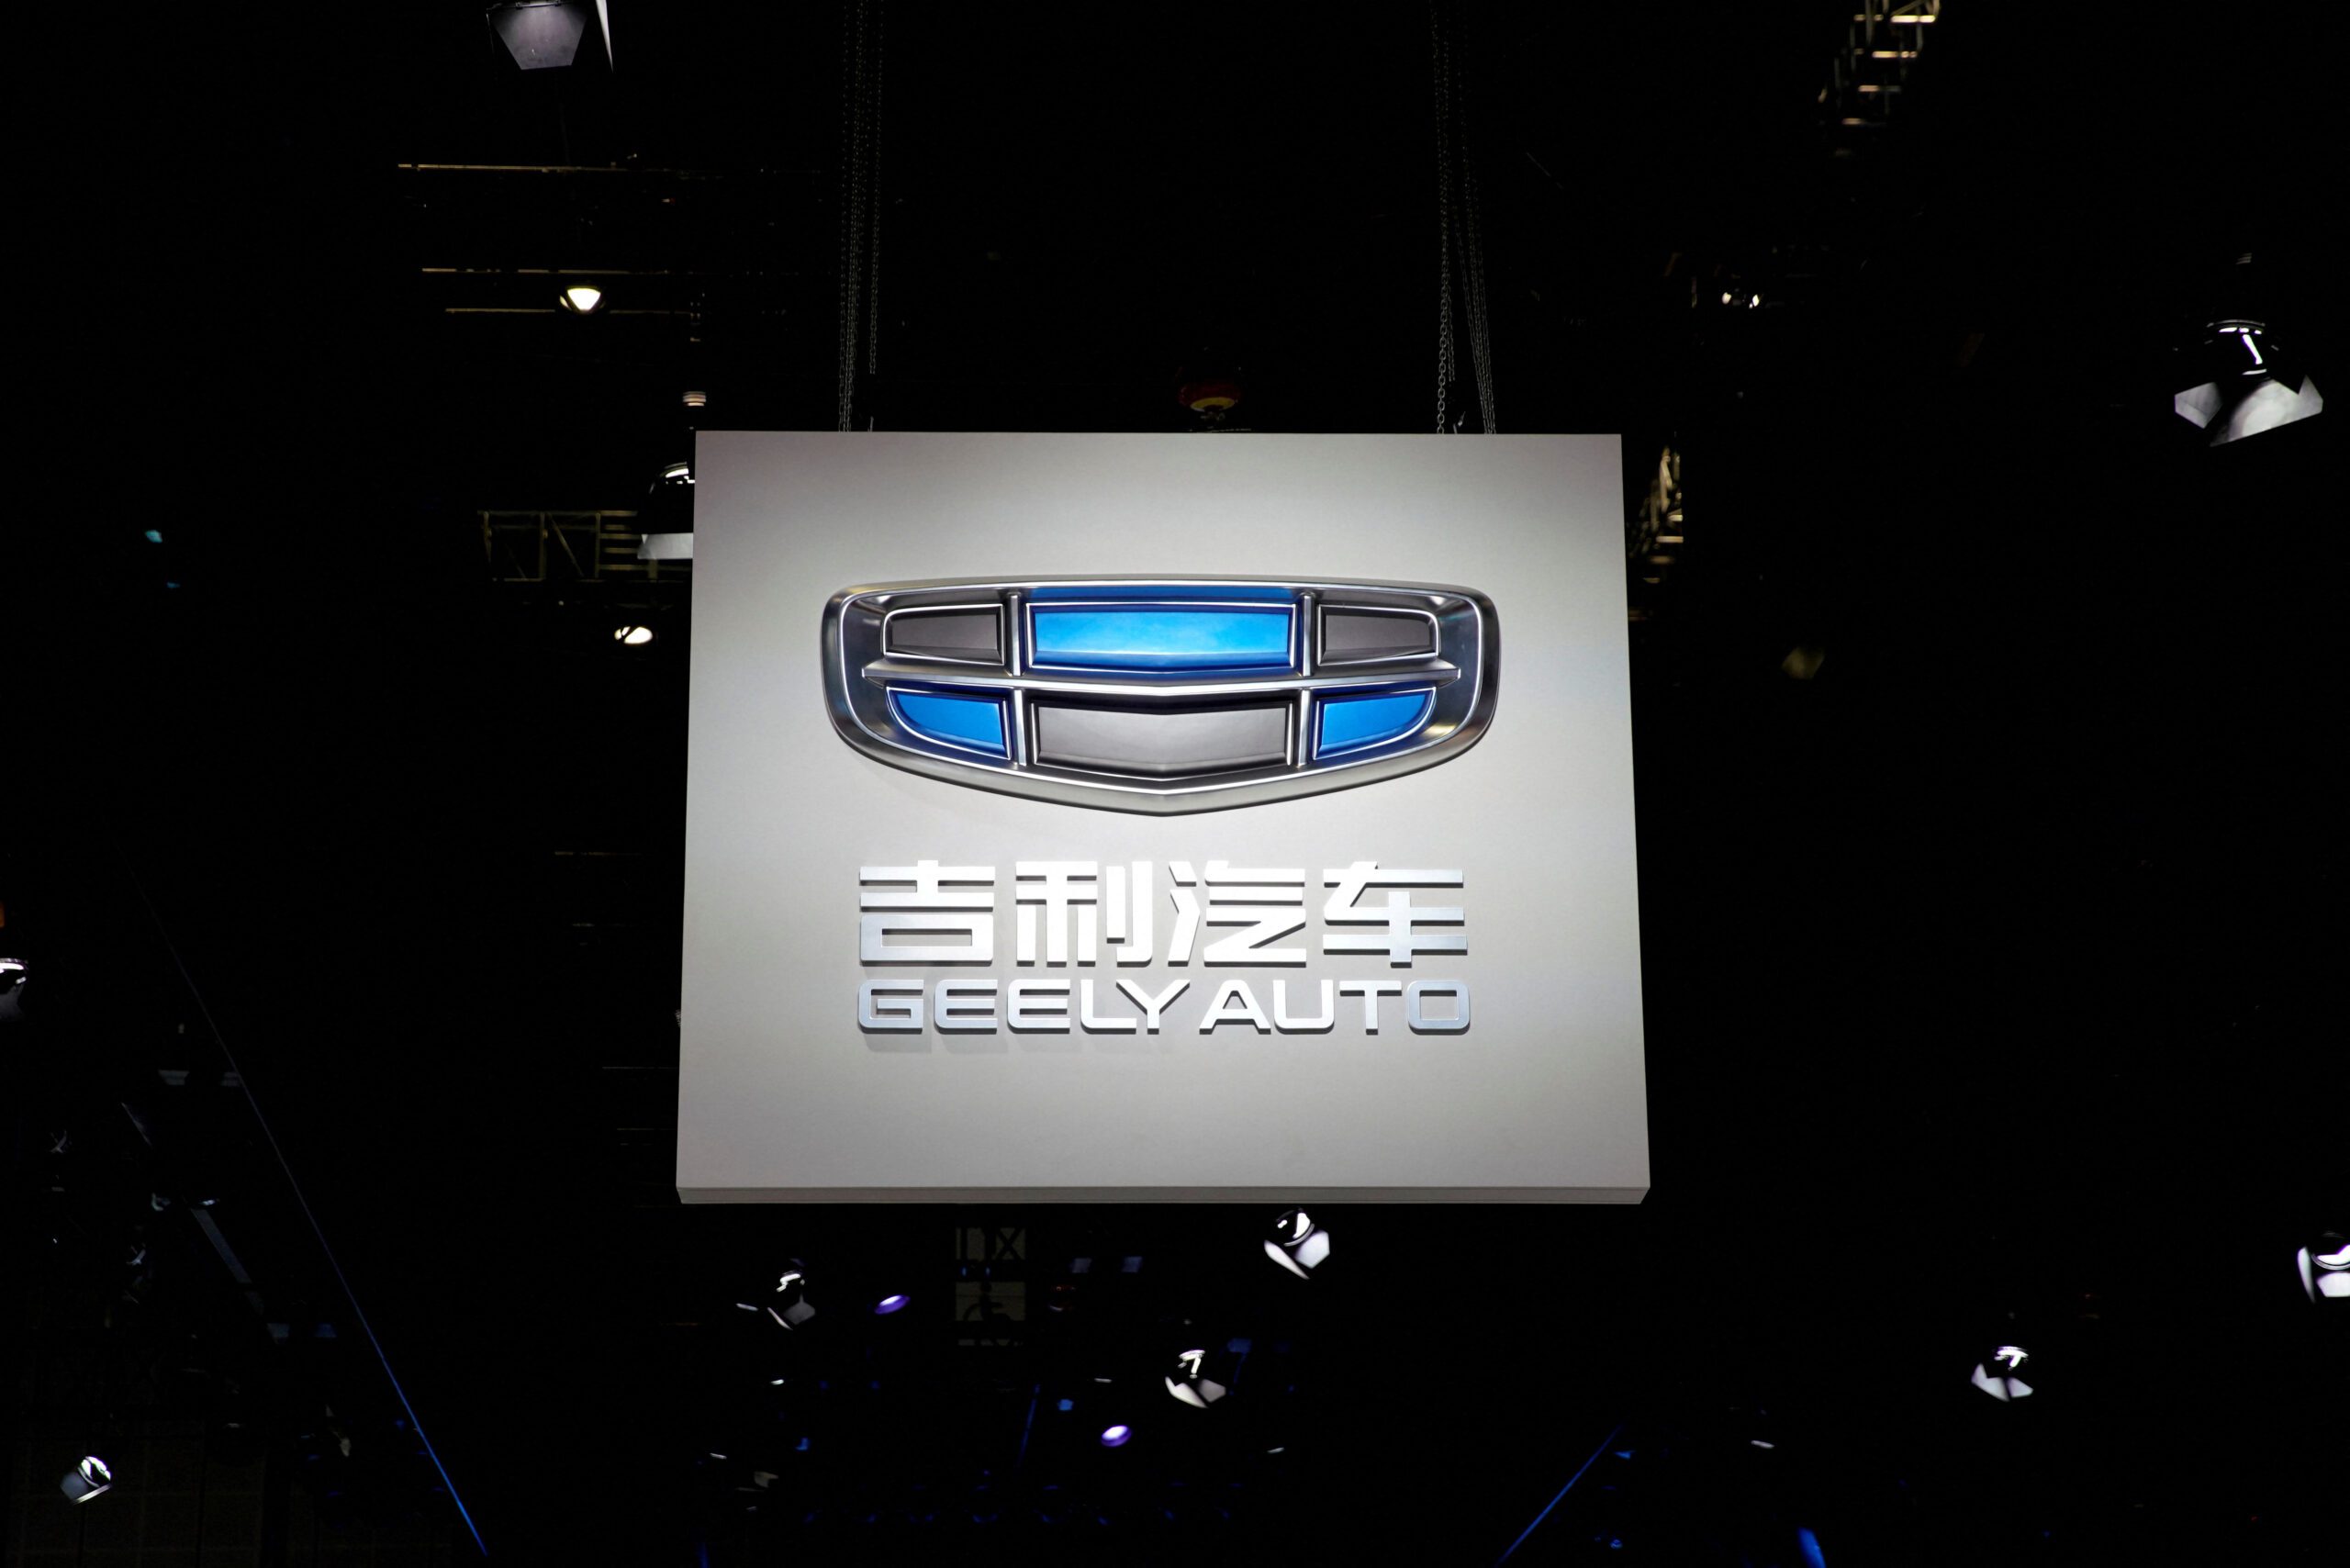 China's Geely planning entry into Thailand's EV market: report